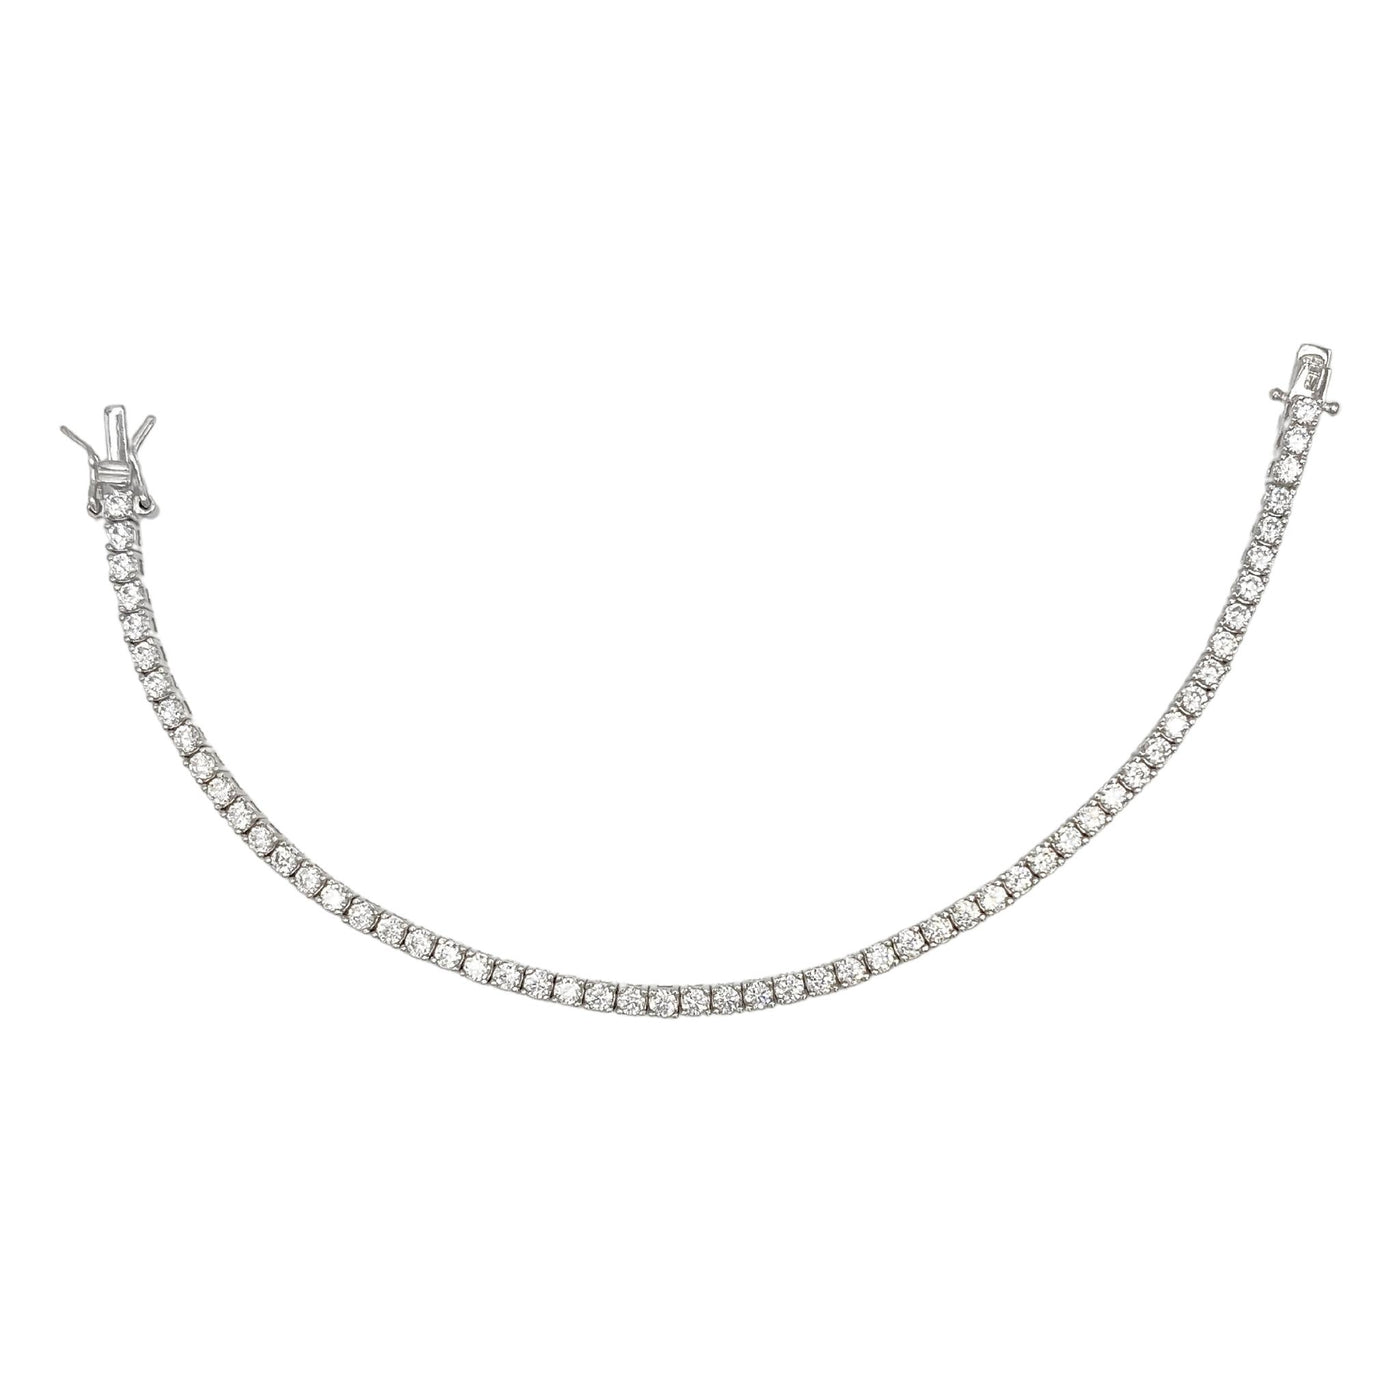 Silver casting tennis bracelet with white round stones - 2.5 mm